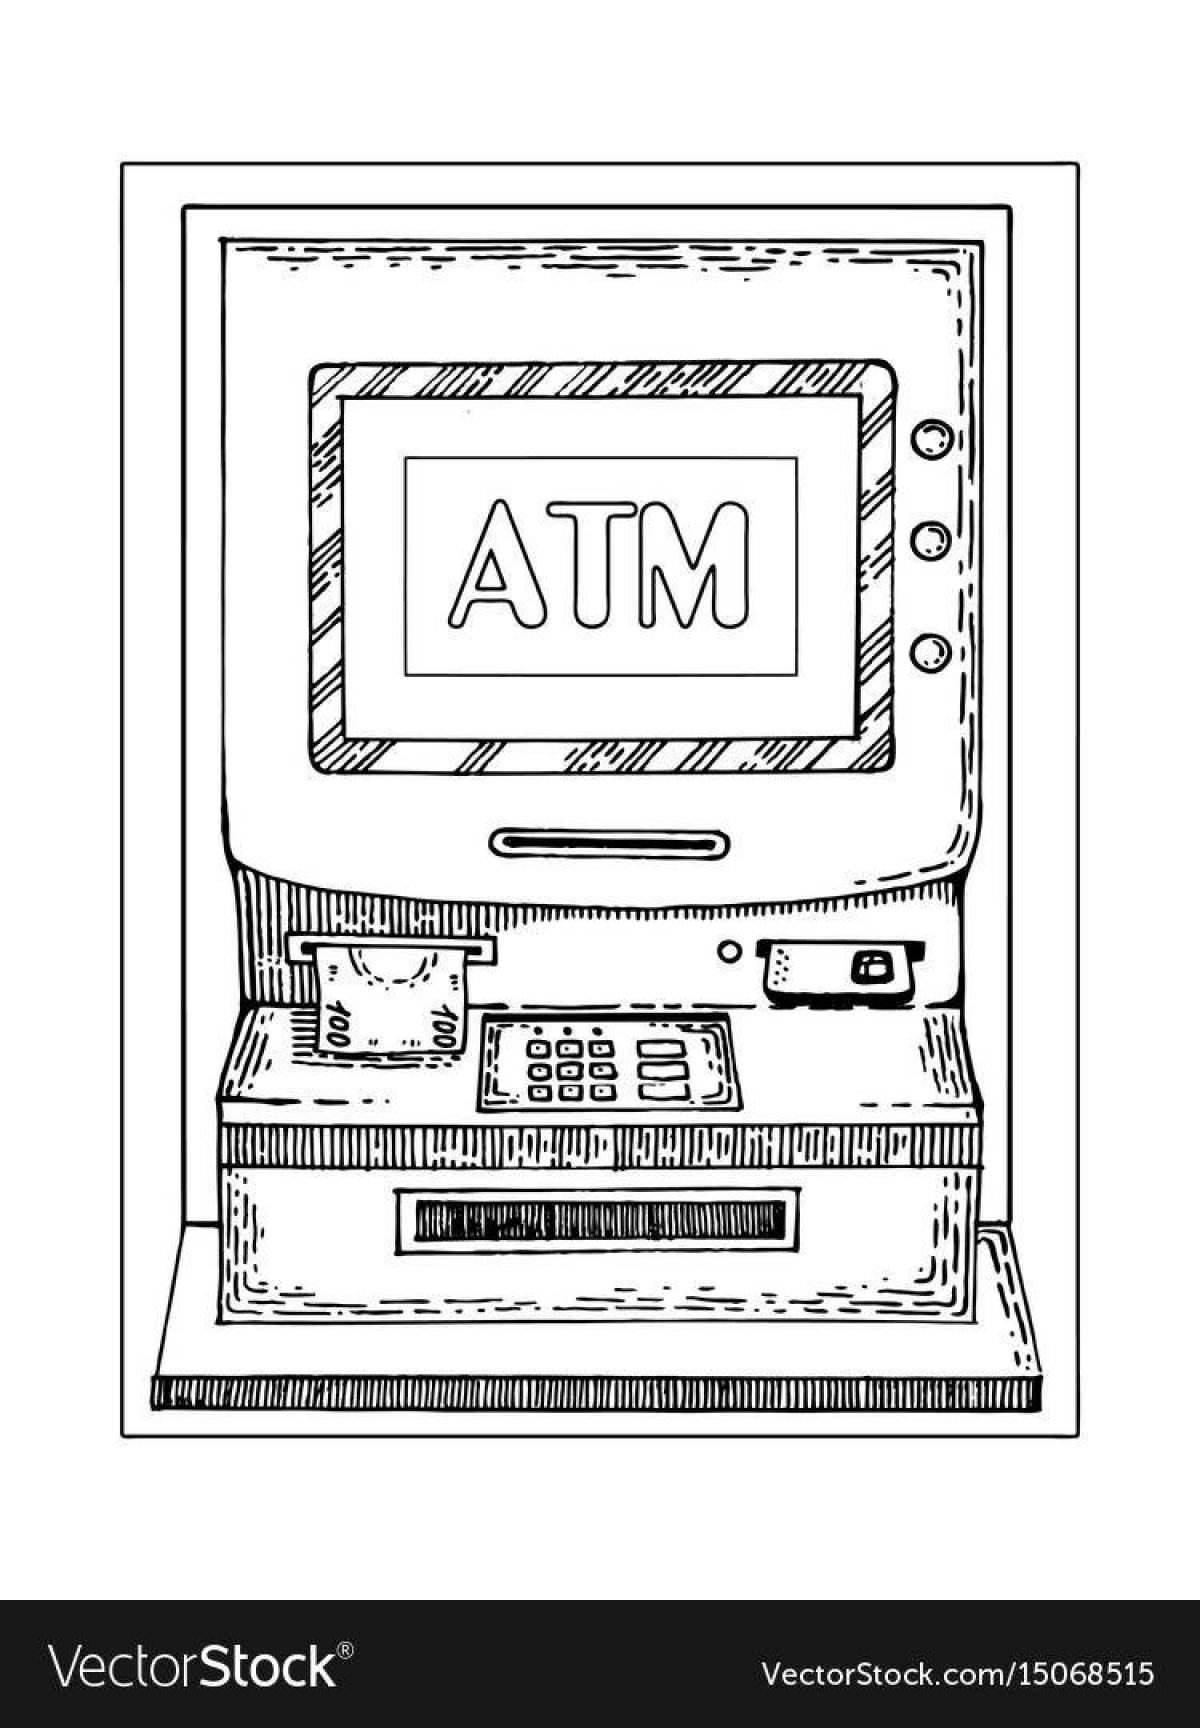 Amusing coloring of ATMs